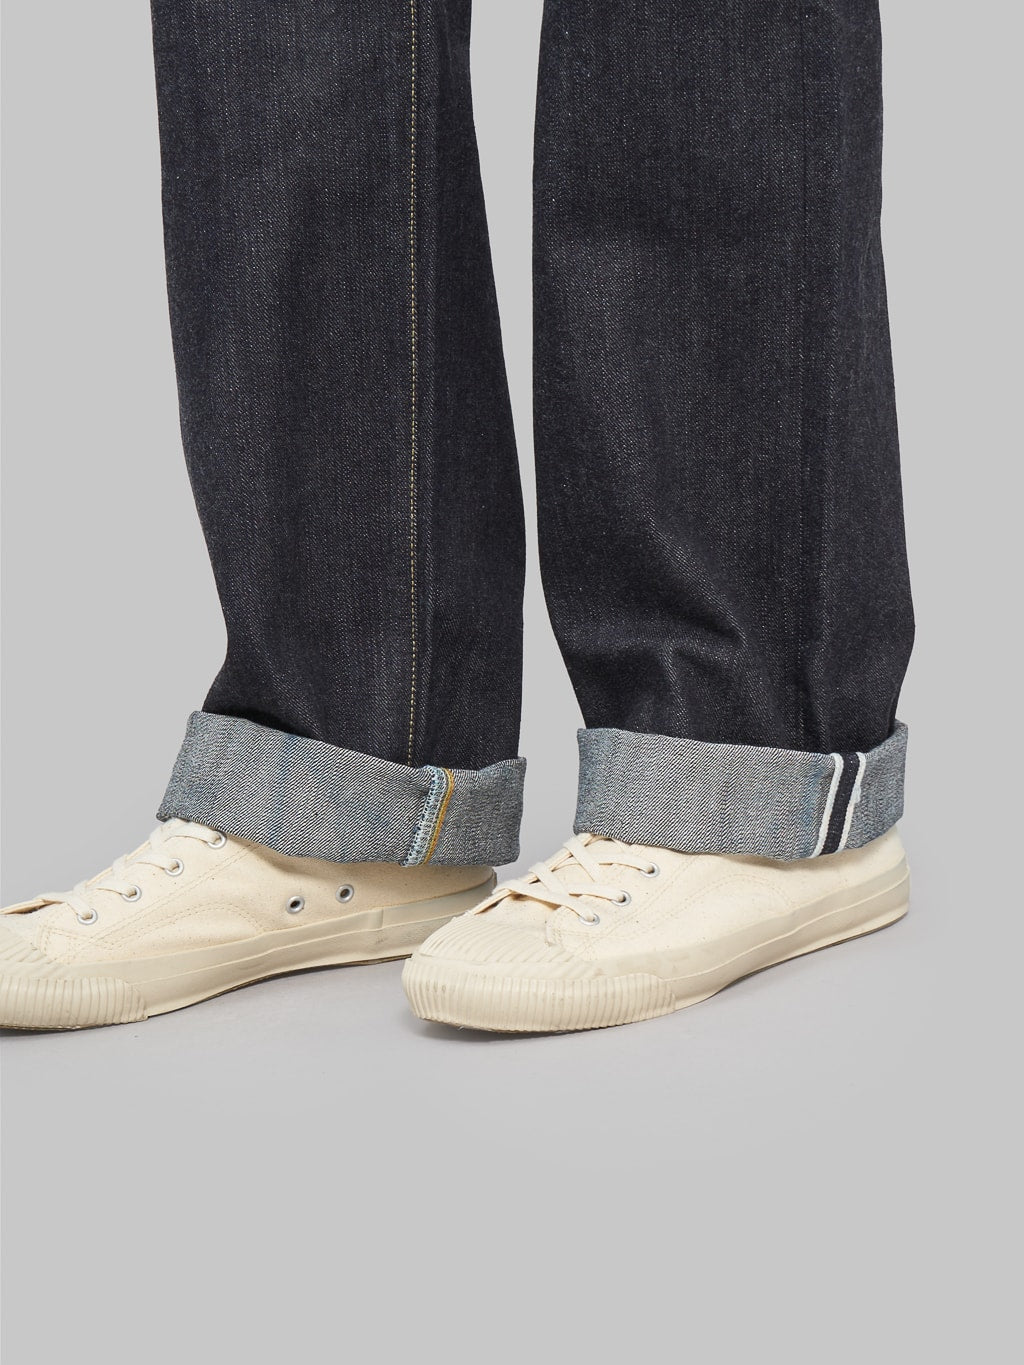 The Flat Head FN-D111 14.5oz Wide Straight Jeans